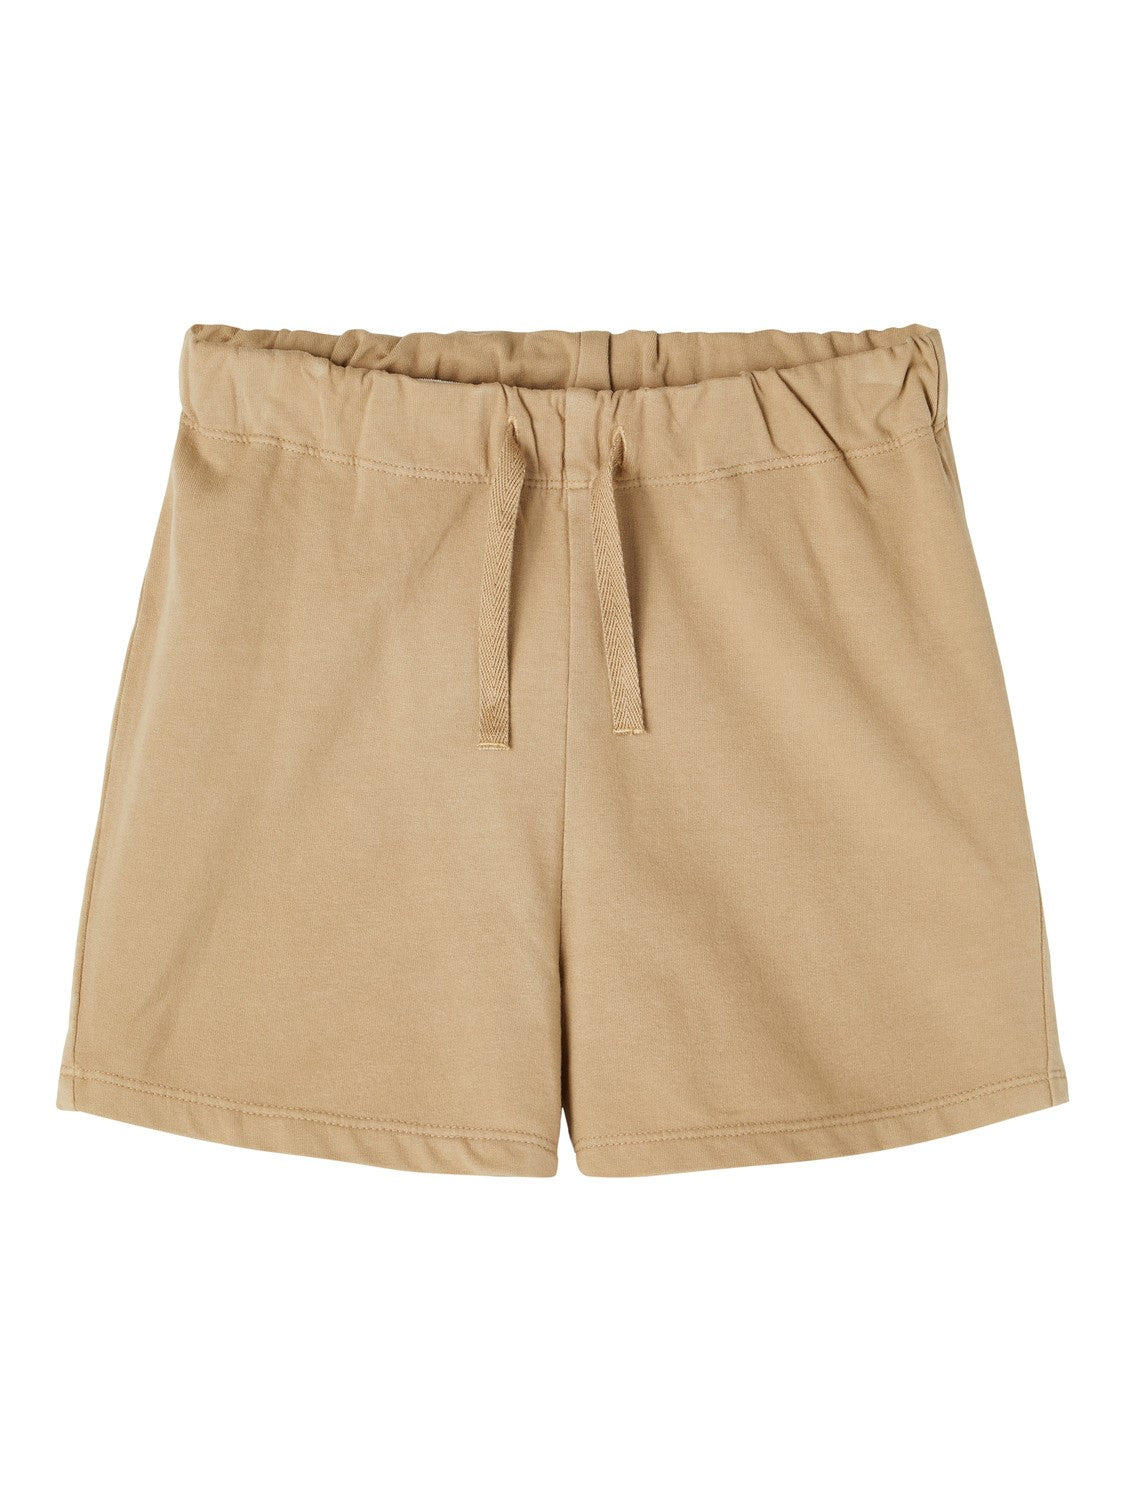 Lil 'Atelier - Hibo Loose Shorts - Iced Coffee